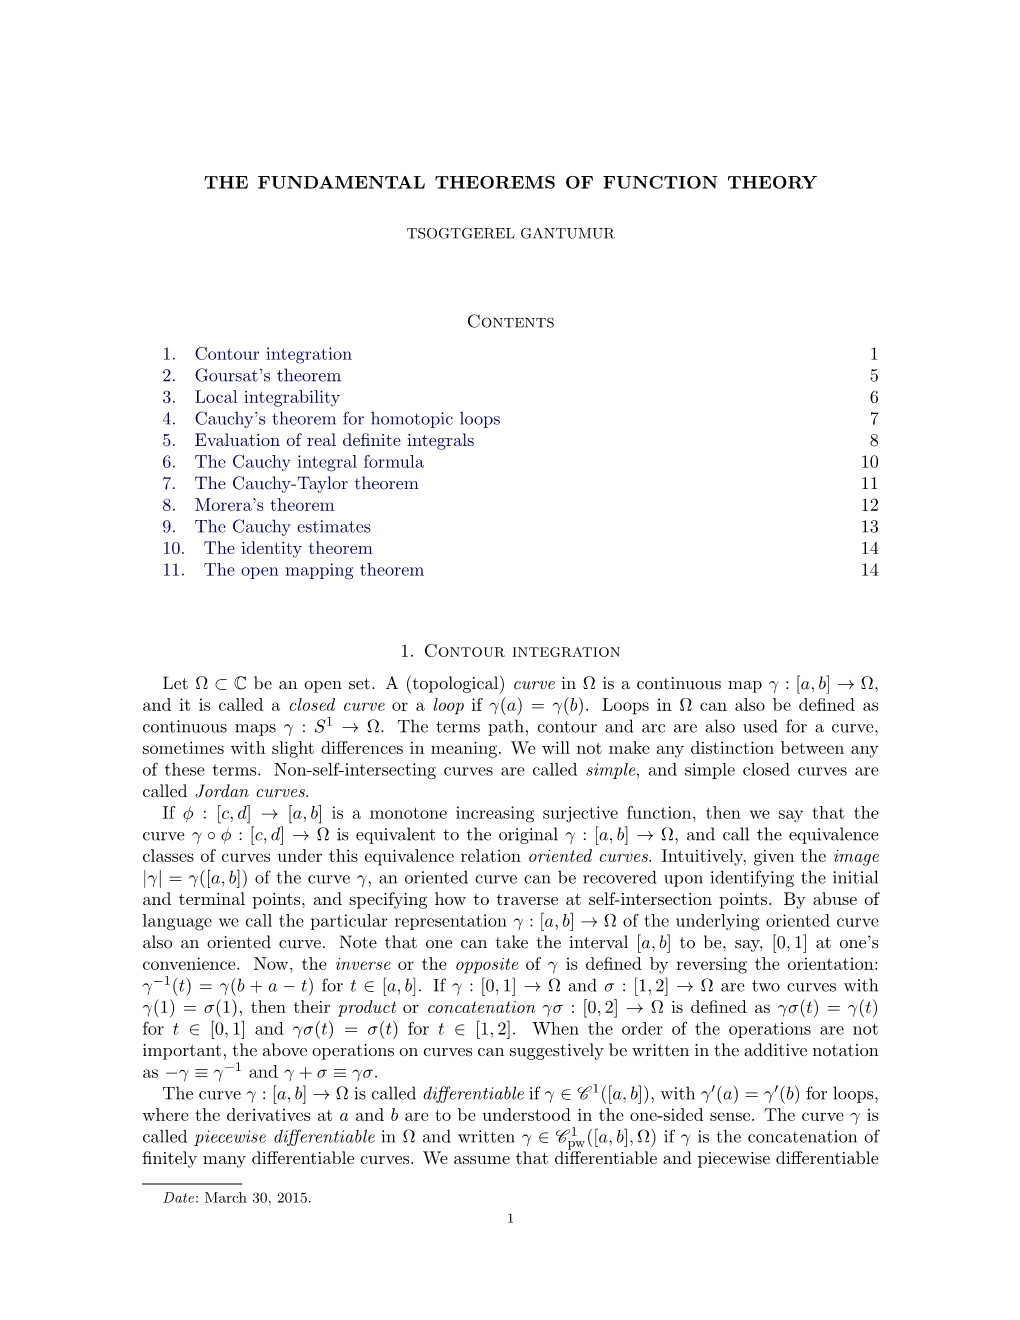 Fundamental Theorems of Function Theory